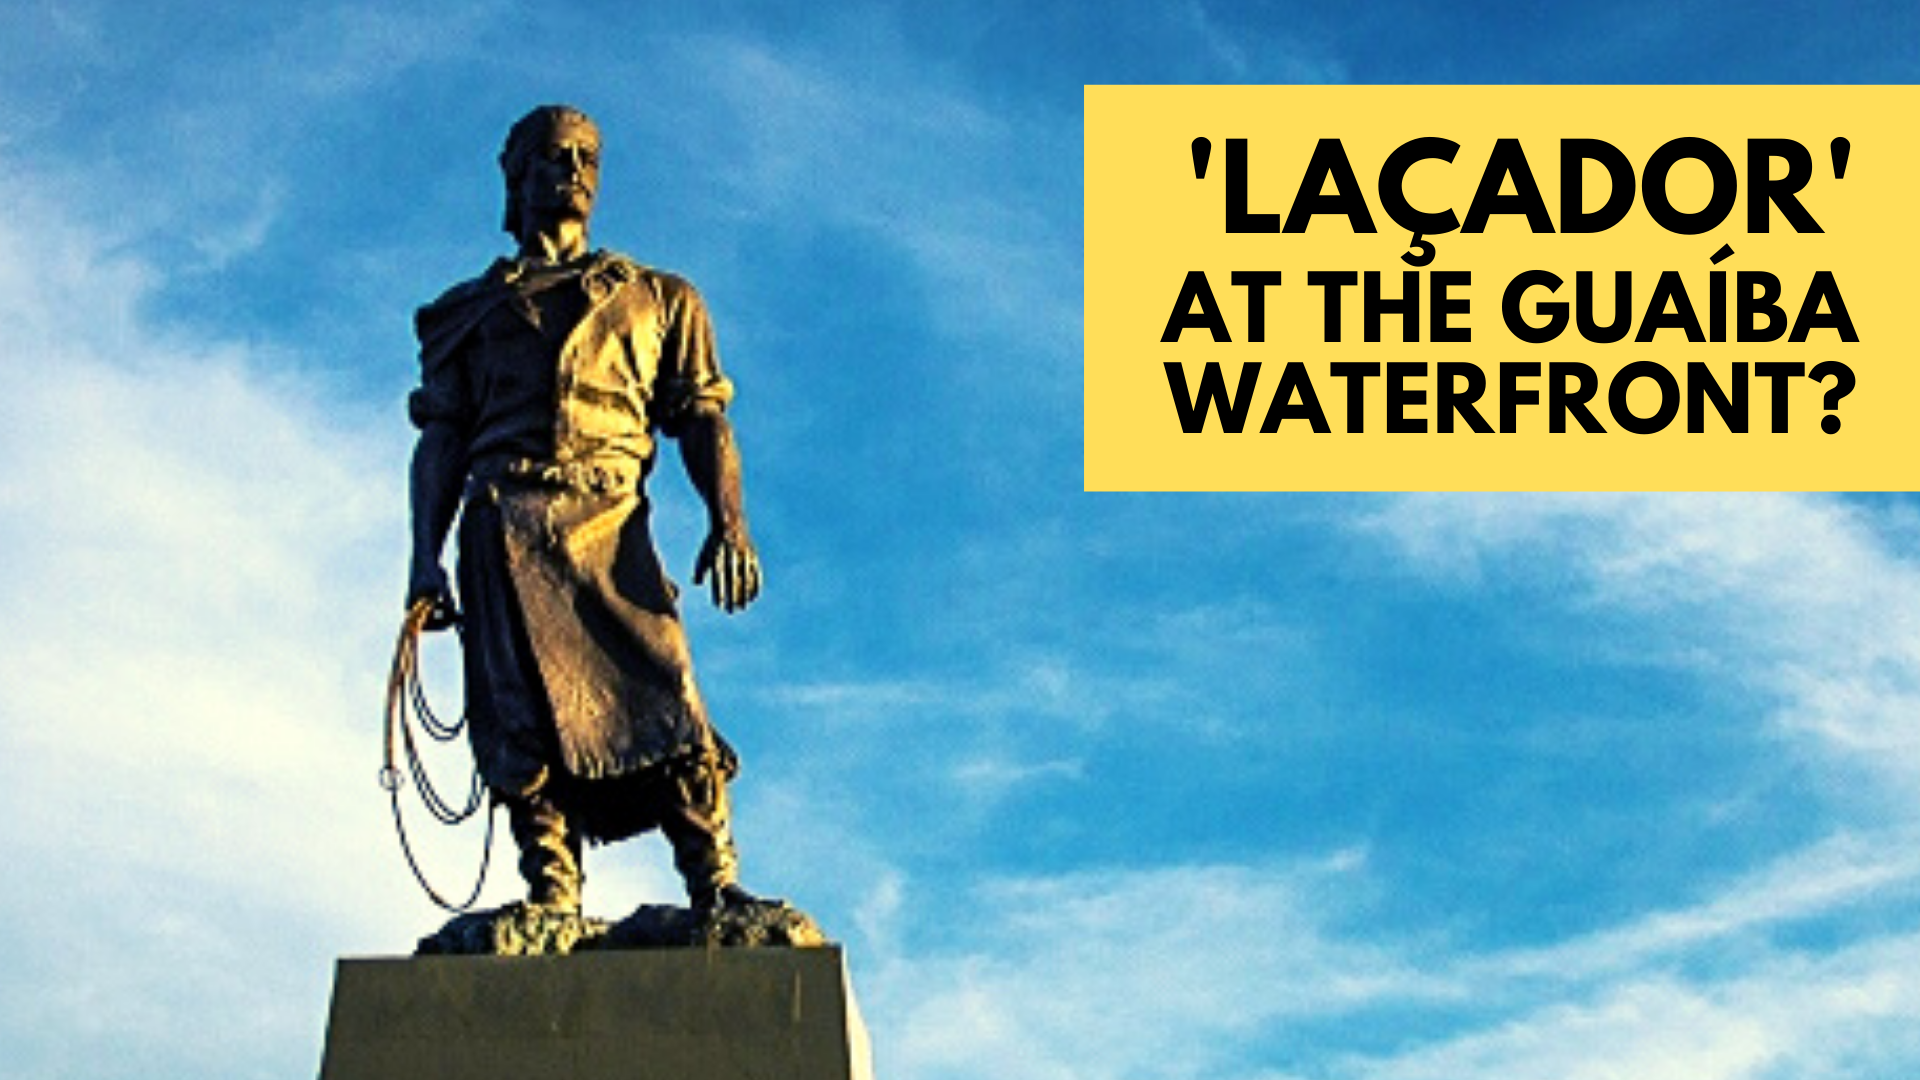 What is the best place for the Laçador statue?